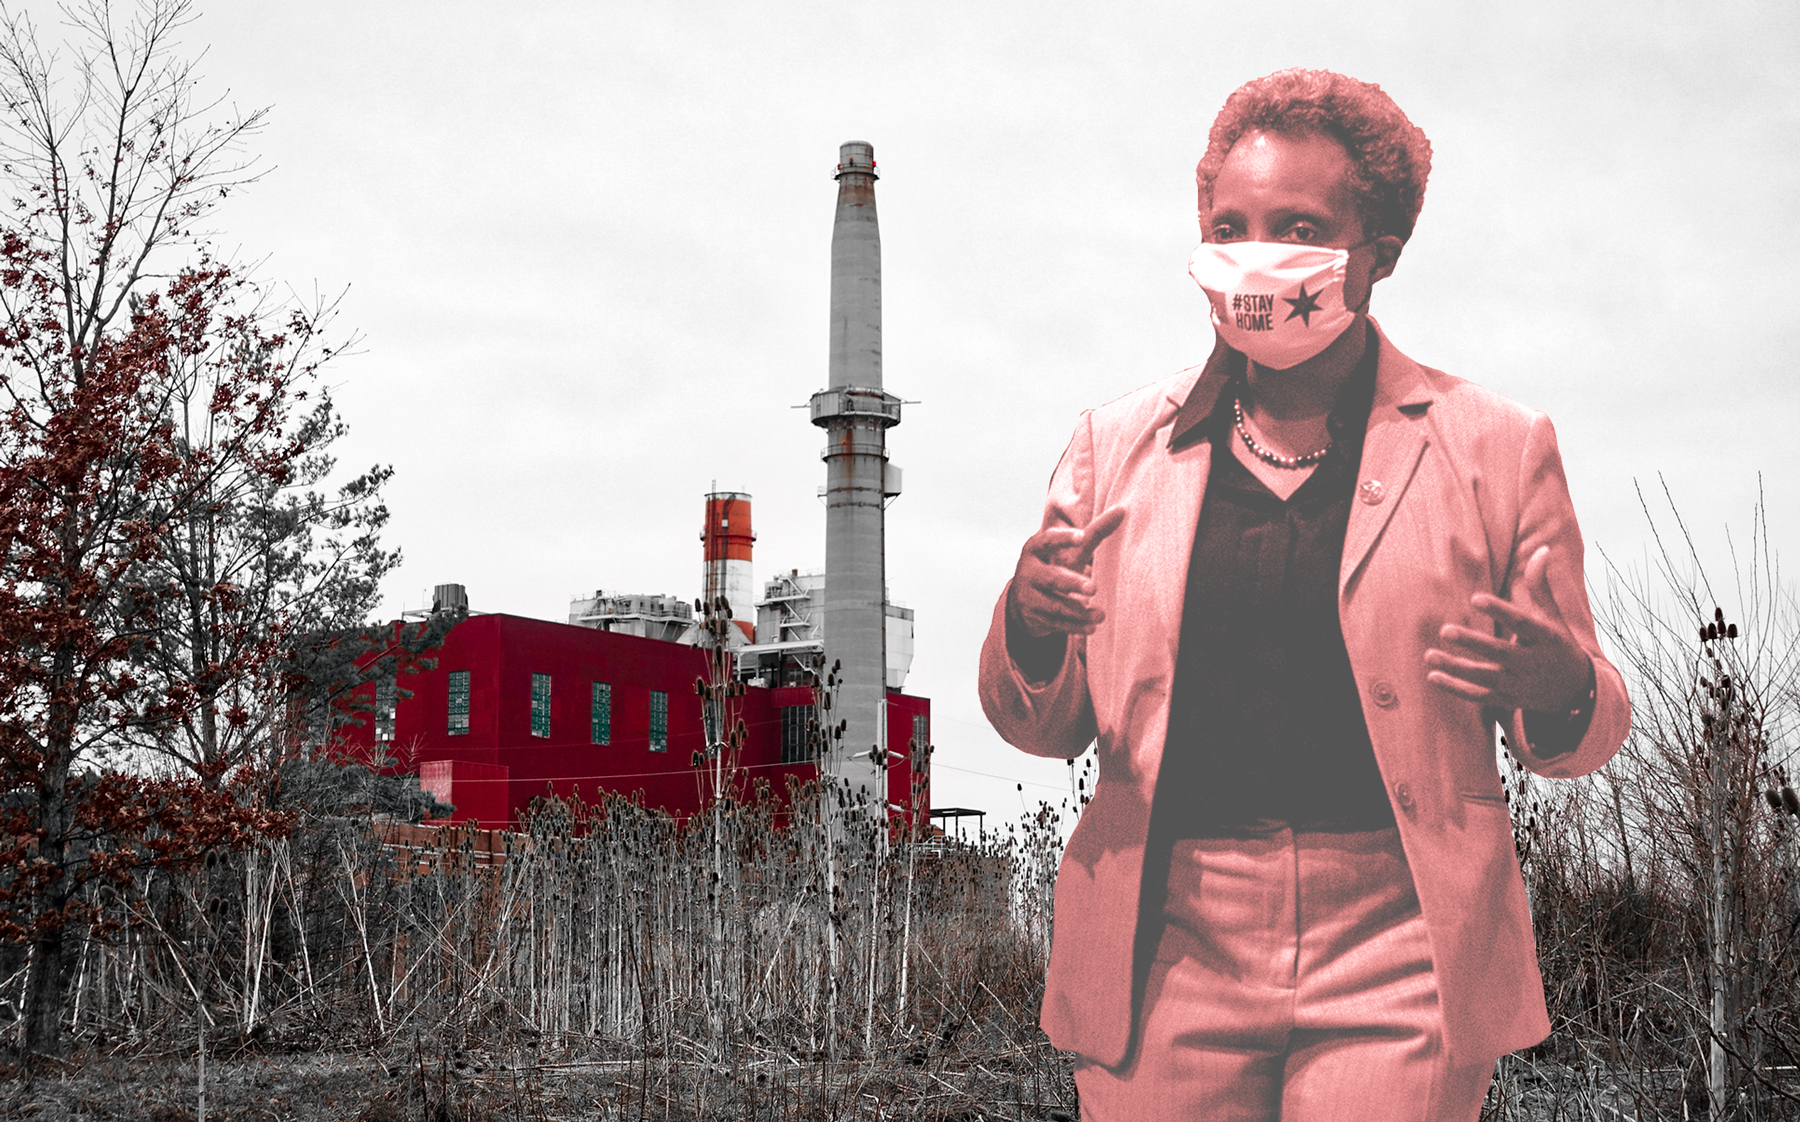 Mayor Lori Lightfoot and the former Crawford Coal Plant in Little Village (Credit: Lightfoot by Tyler LaRiviere - Pool/Getty Images; background by Edna Winti via Flickr)